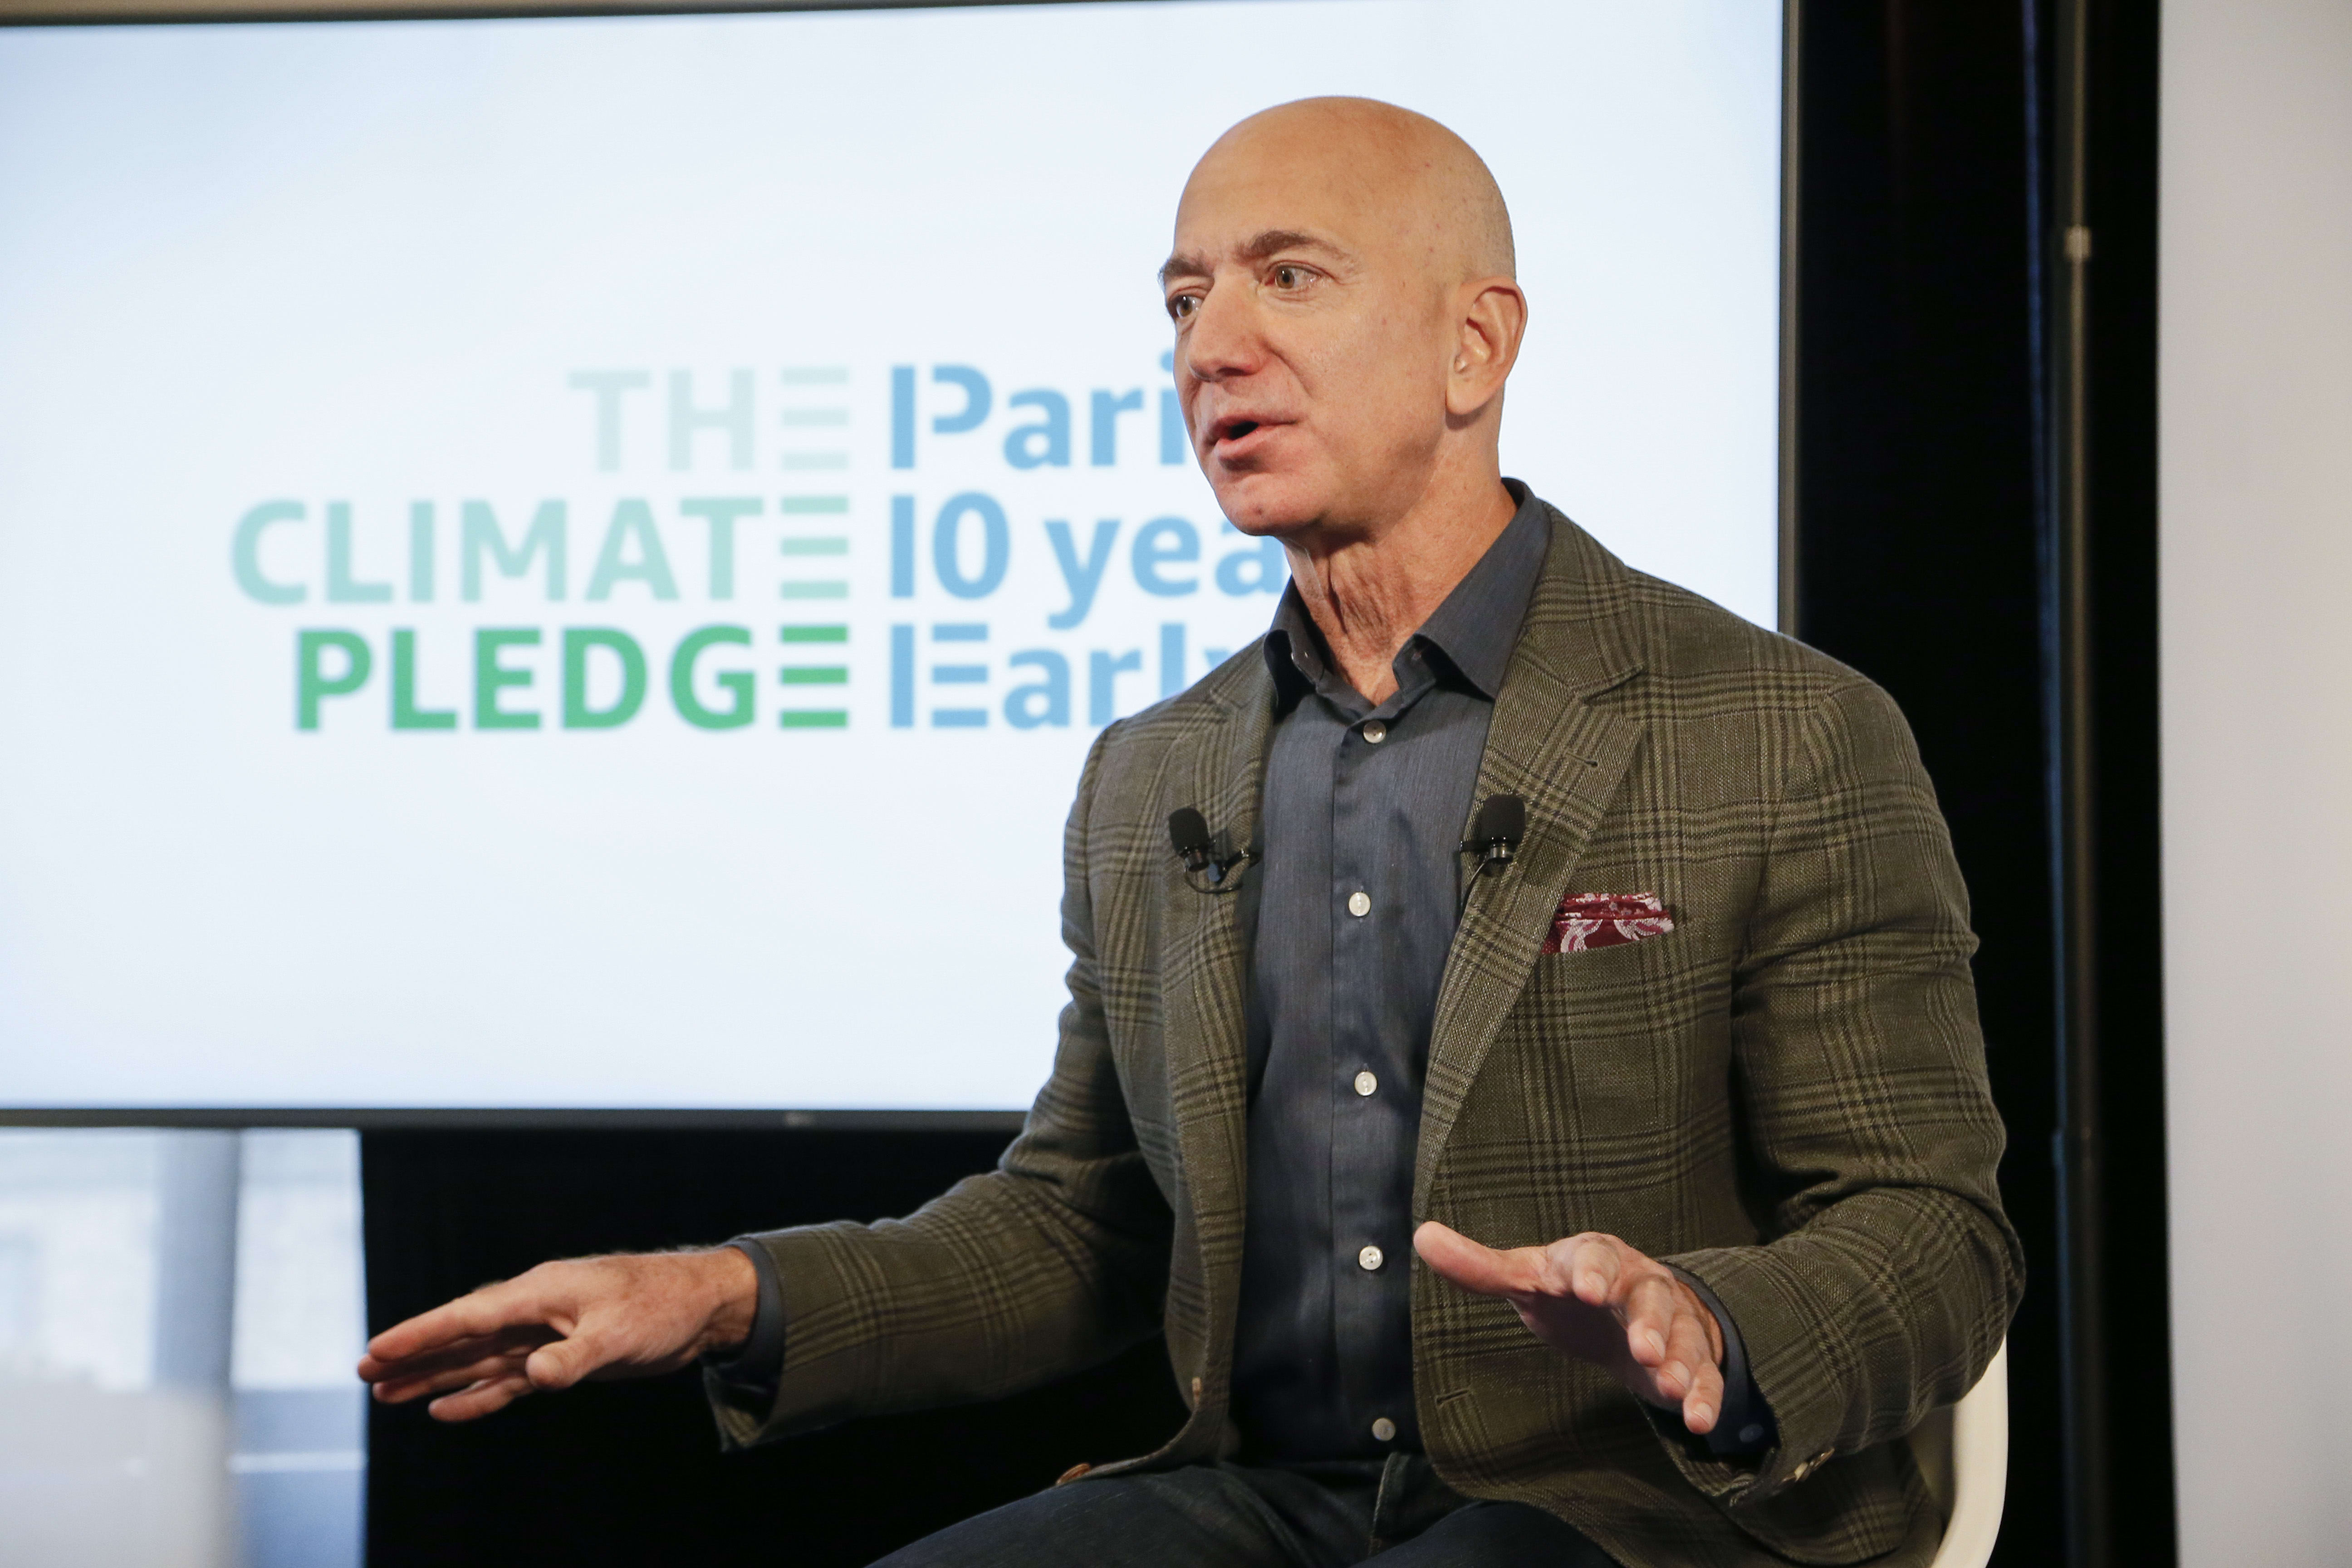 Amazon salespersons pitch to oil and gas: Remember that we actually consume your products!